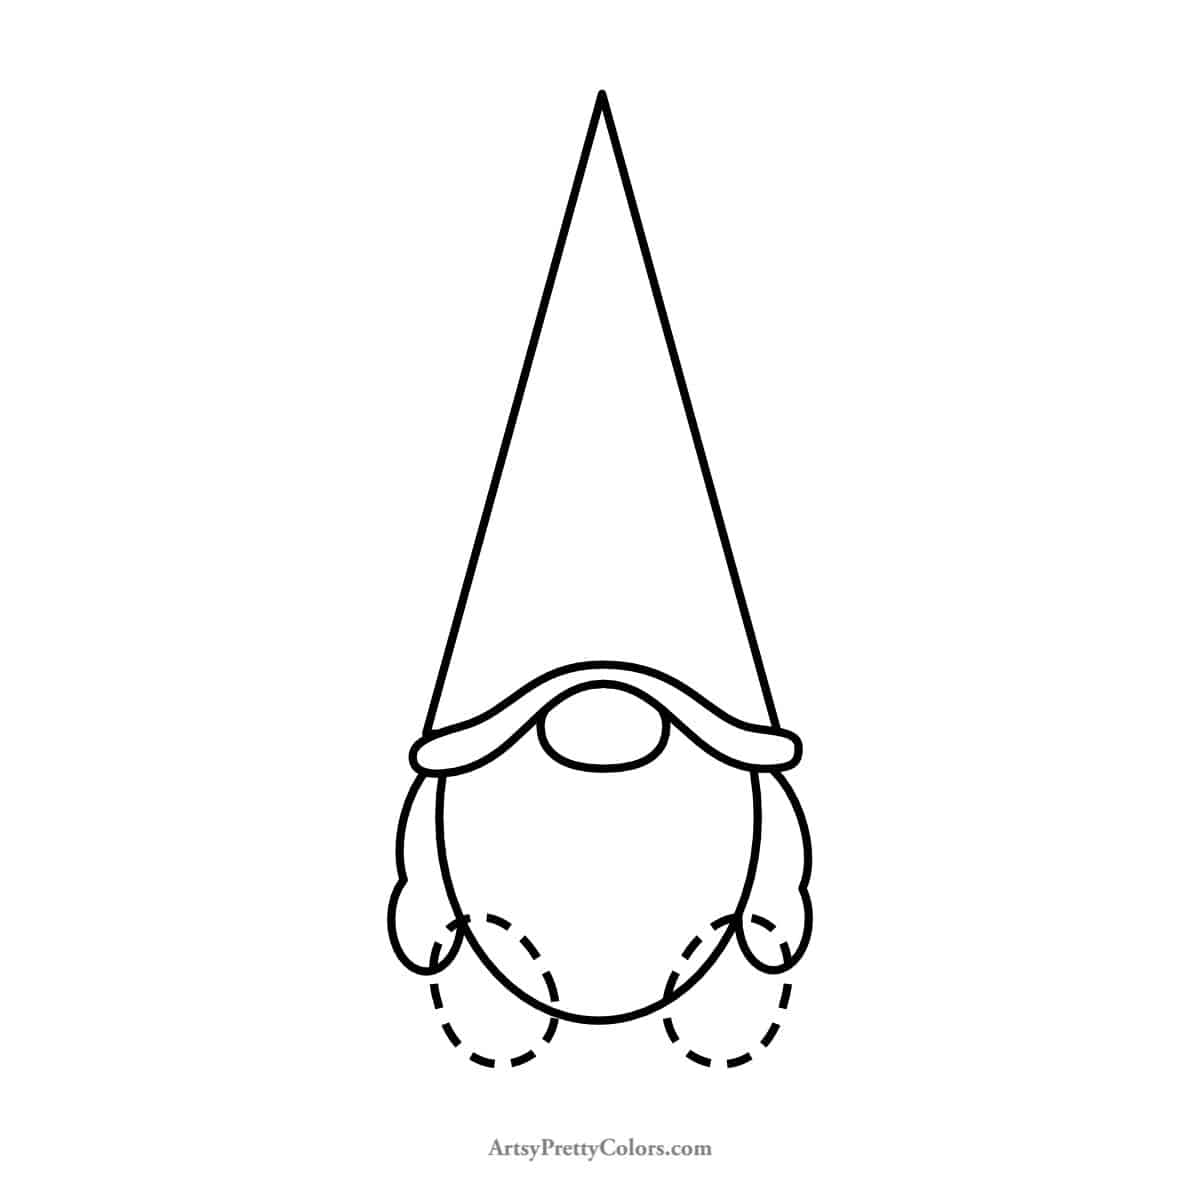 two larger ovals drawn near the bottom of the body of the gnome